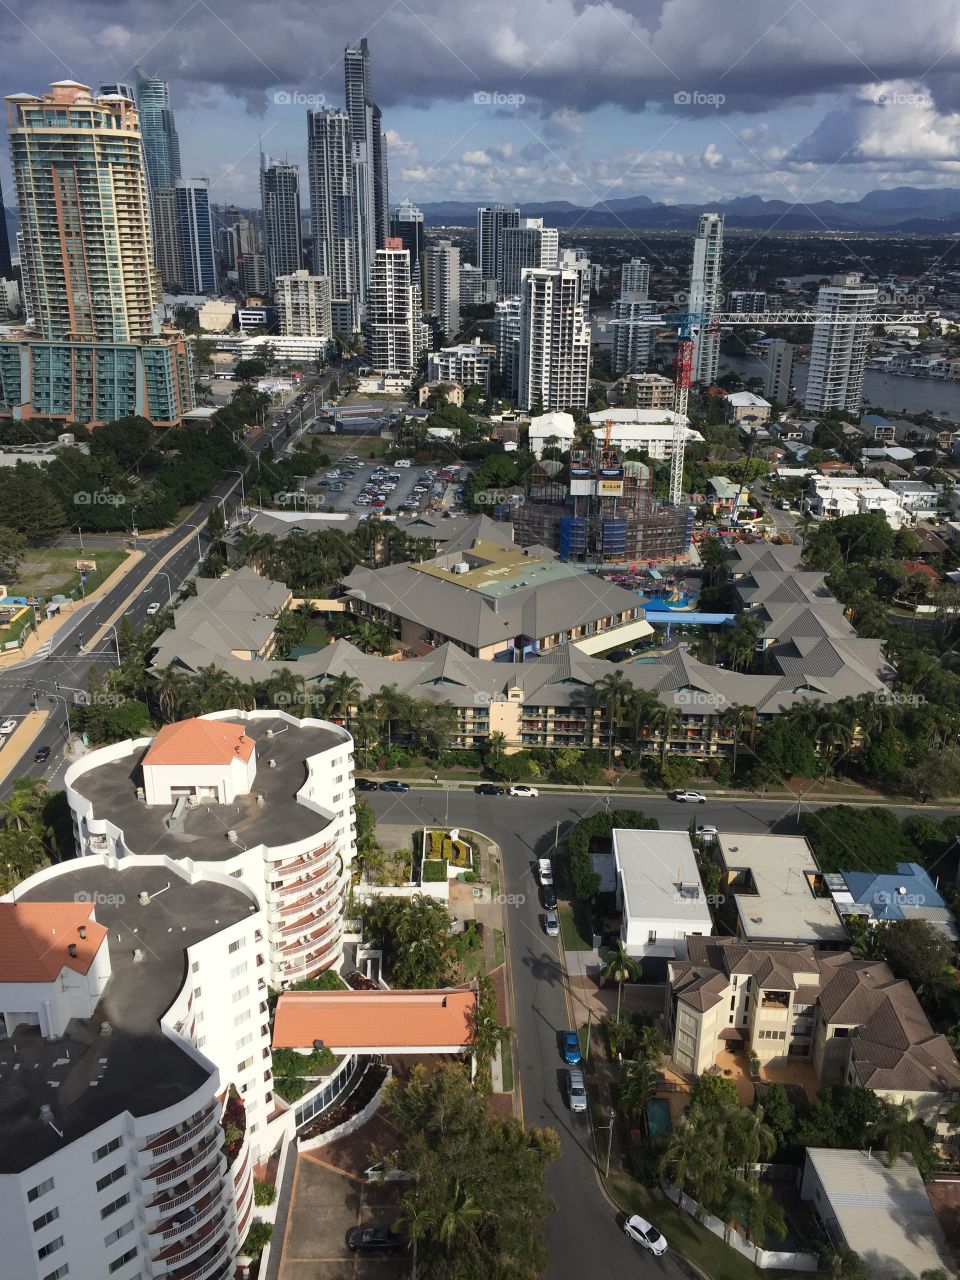 Looking down on to the holiday resort in the city centre of the Gold Coast - Australia 